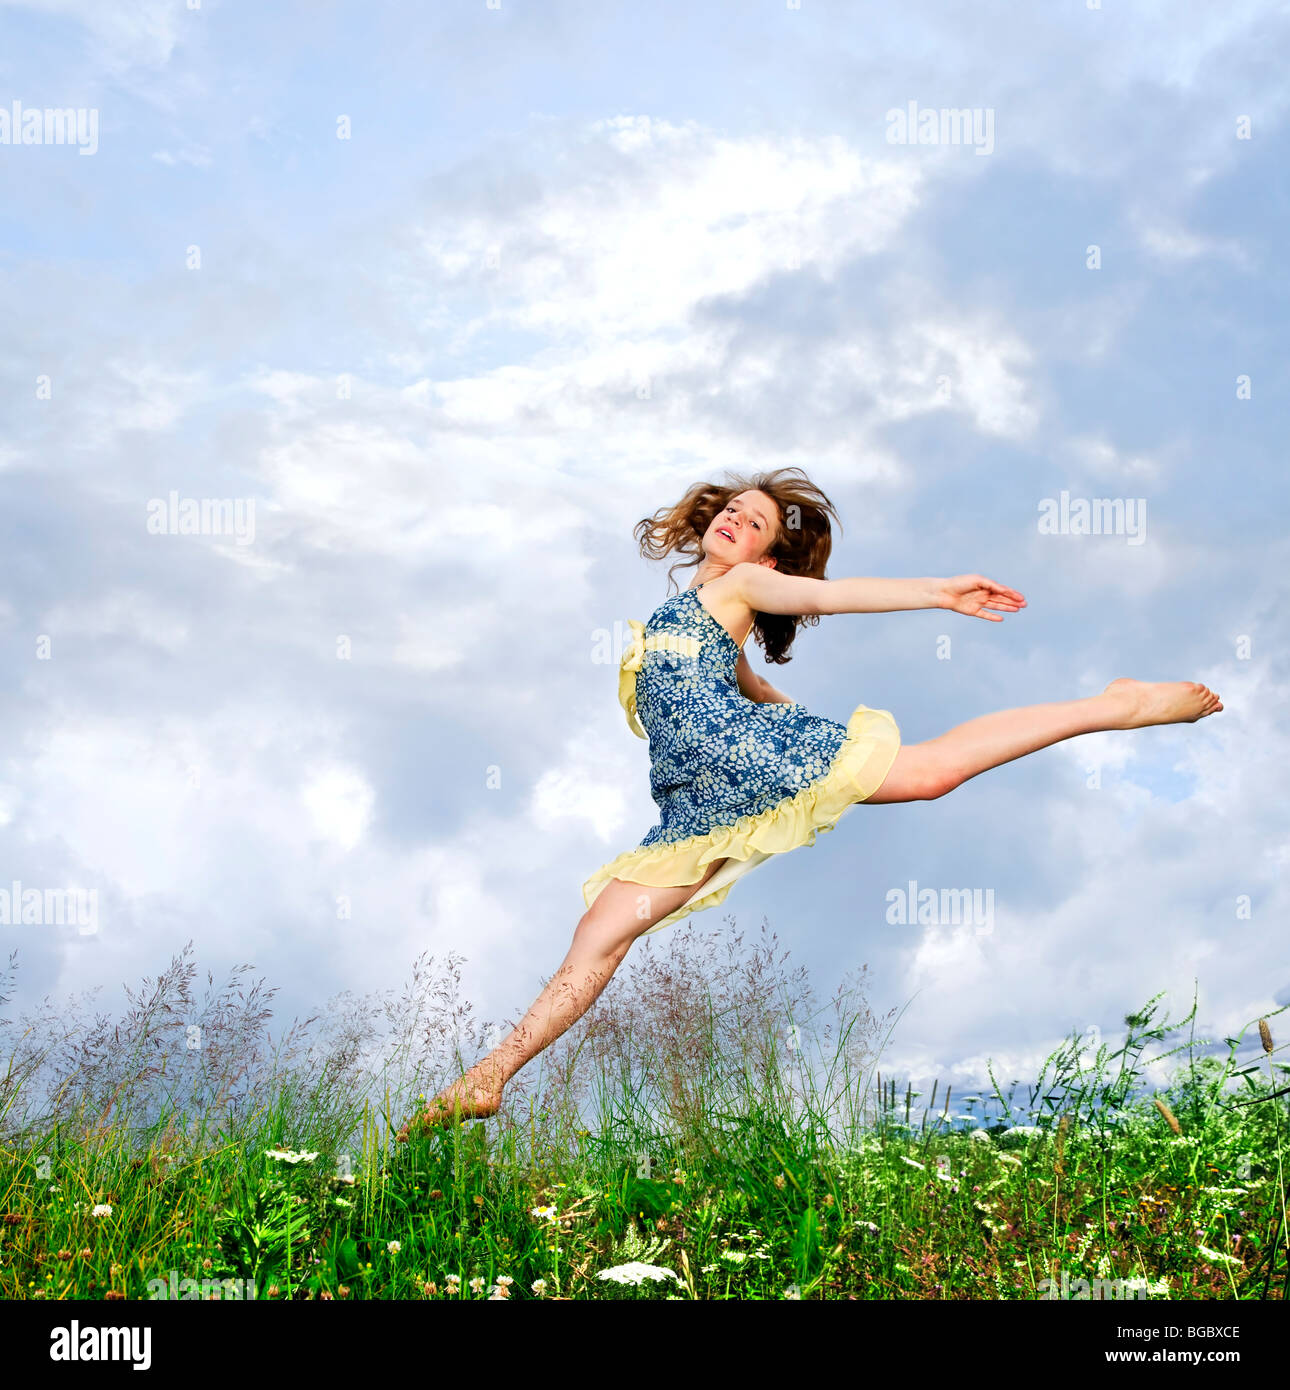 Young teenage girl jumping in summer meadow amid wildflowers Stock Photo